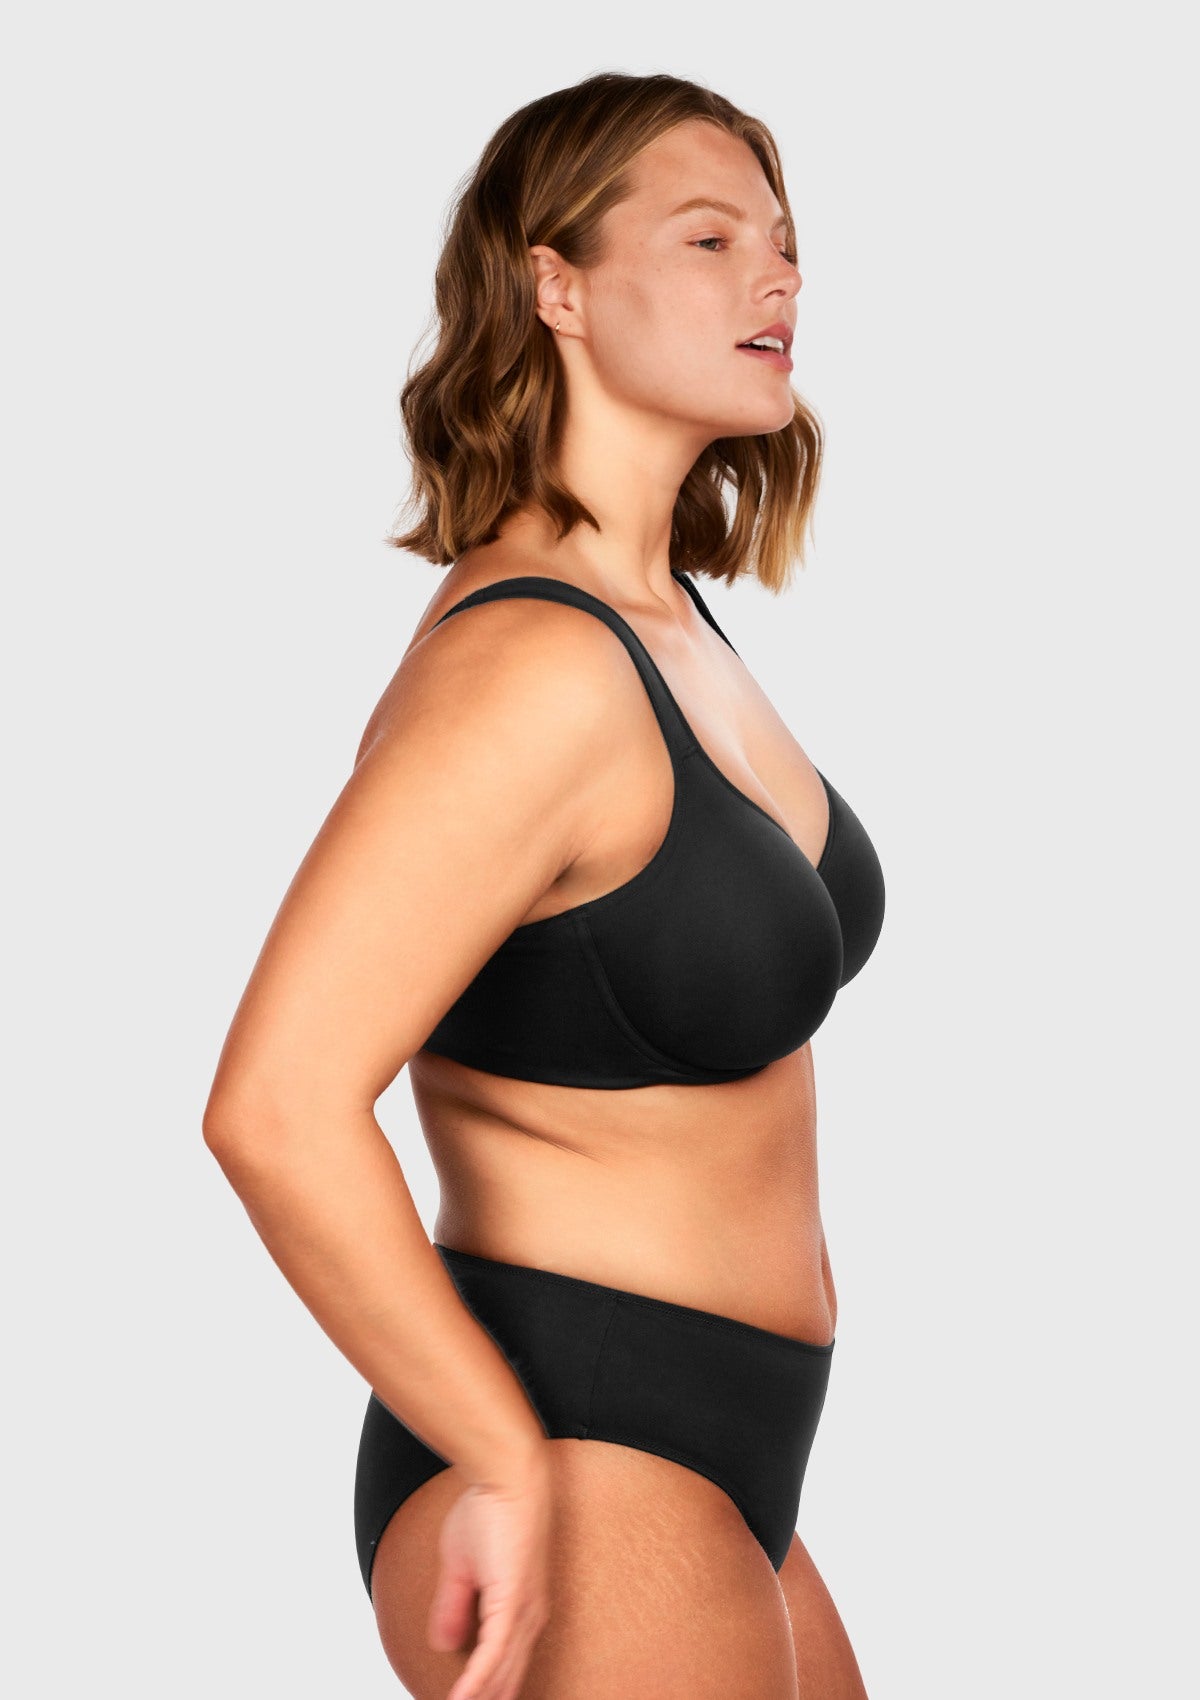 HSIA Joan Soft T-shirt Unlined Non-Padded Soft Cup Minimizer Bra - Black / 36 / G